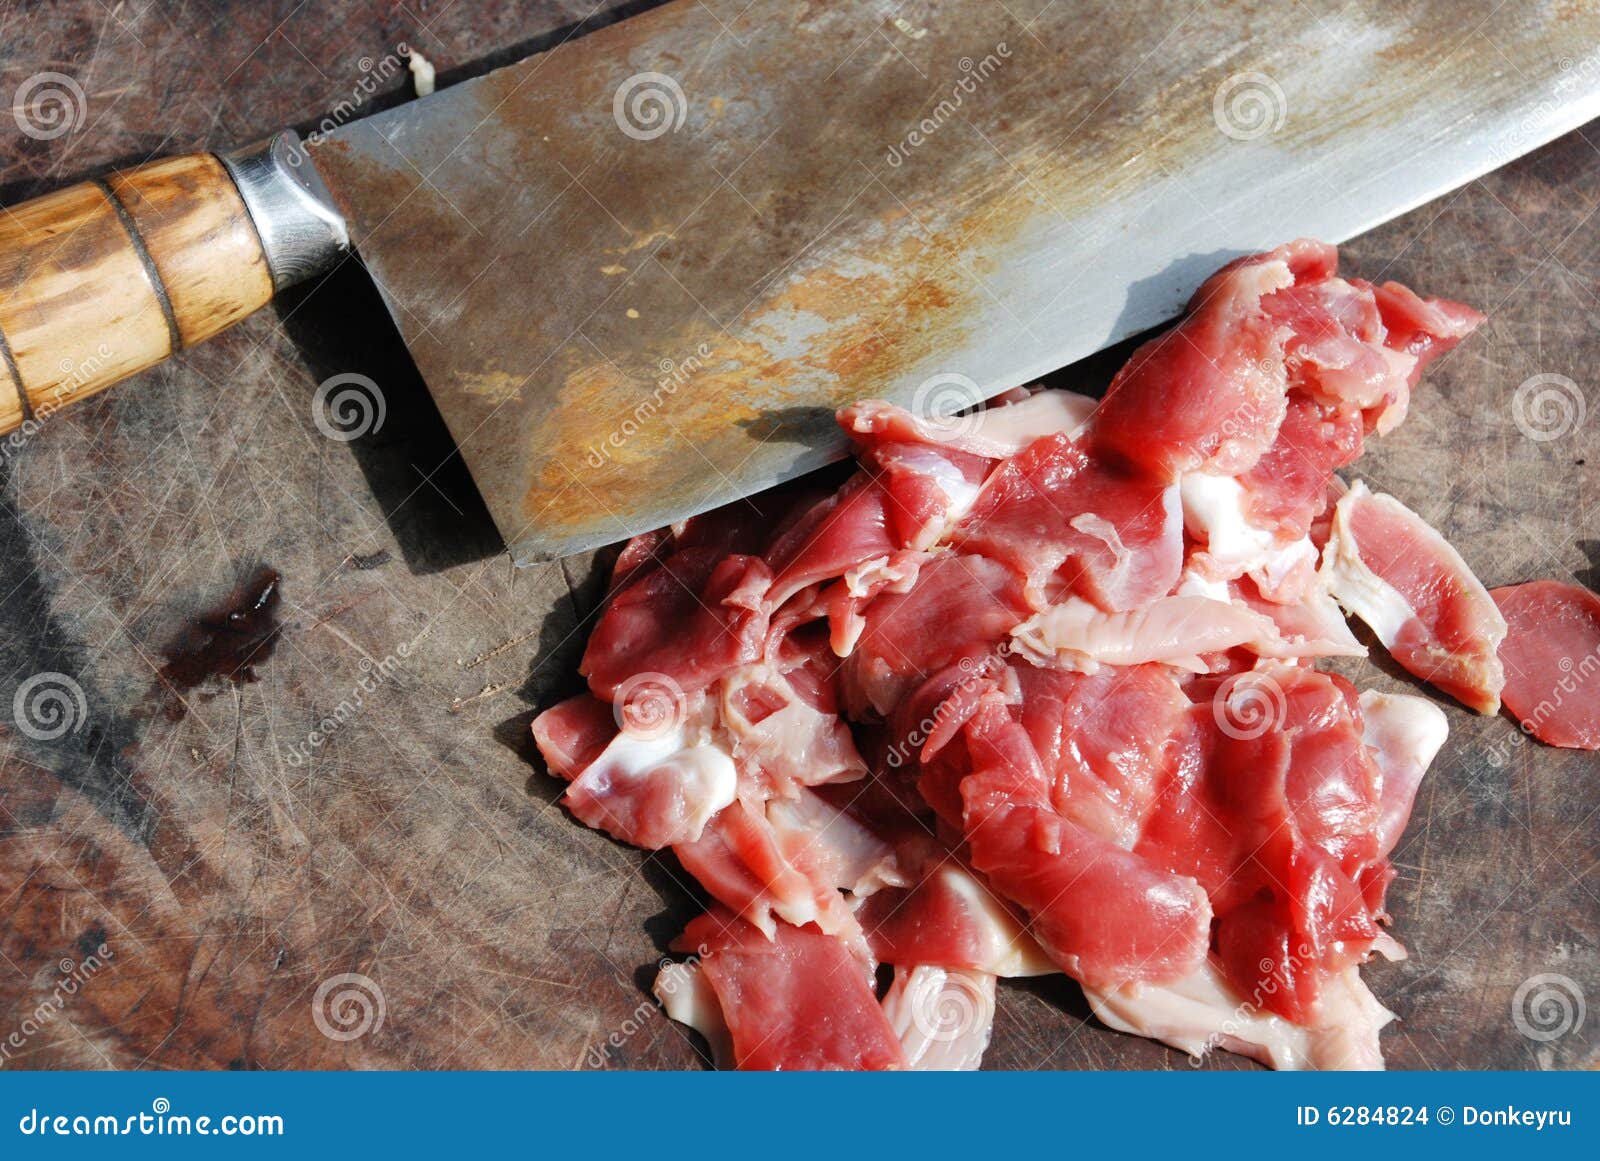 The Meat,wood Chopping Block And Kitchen Knife Stock Photo 